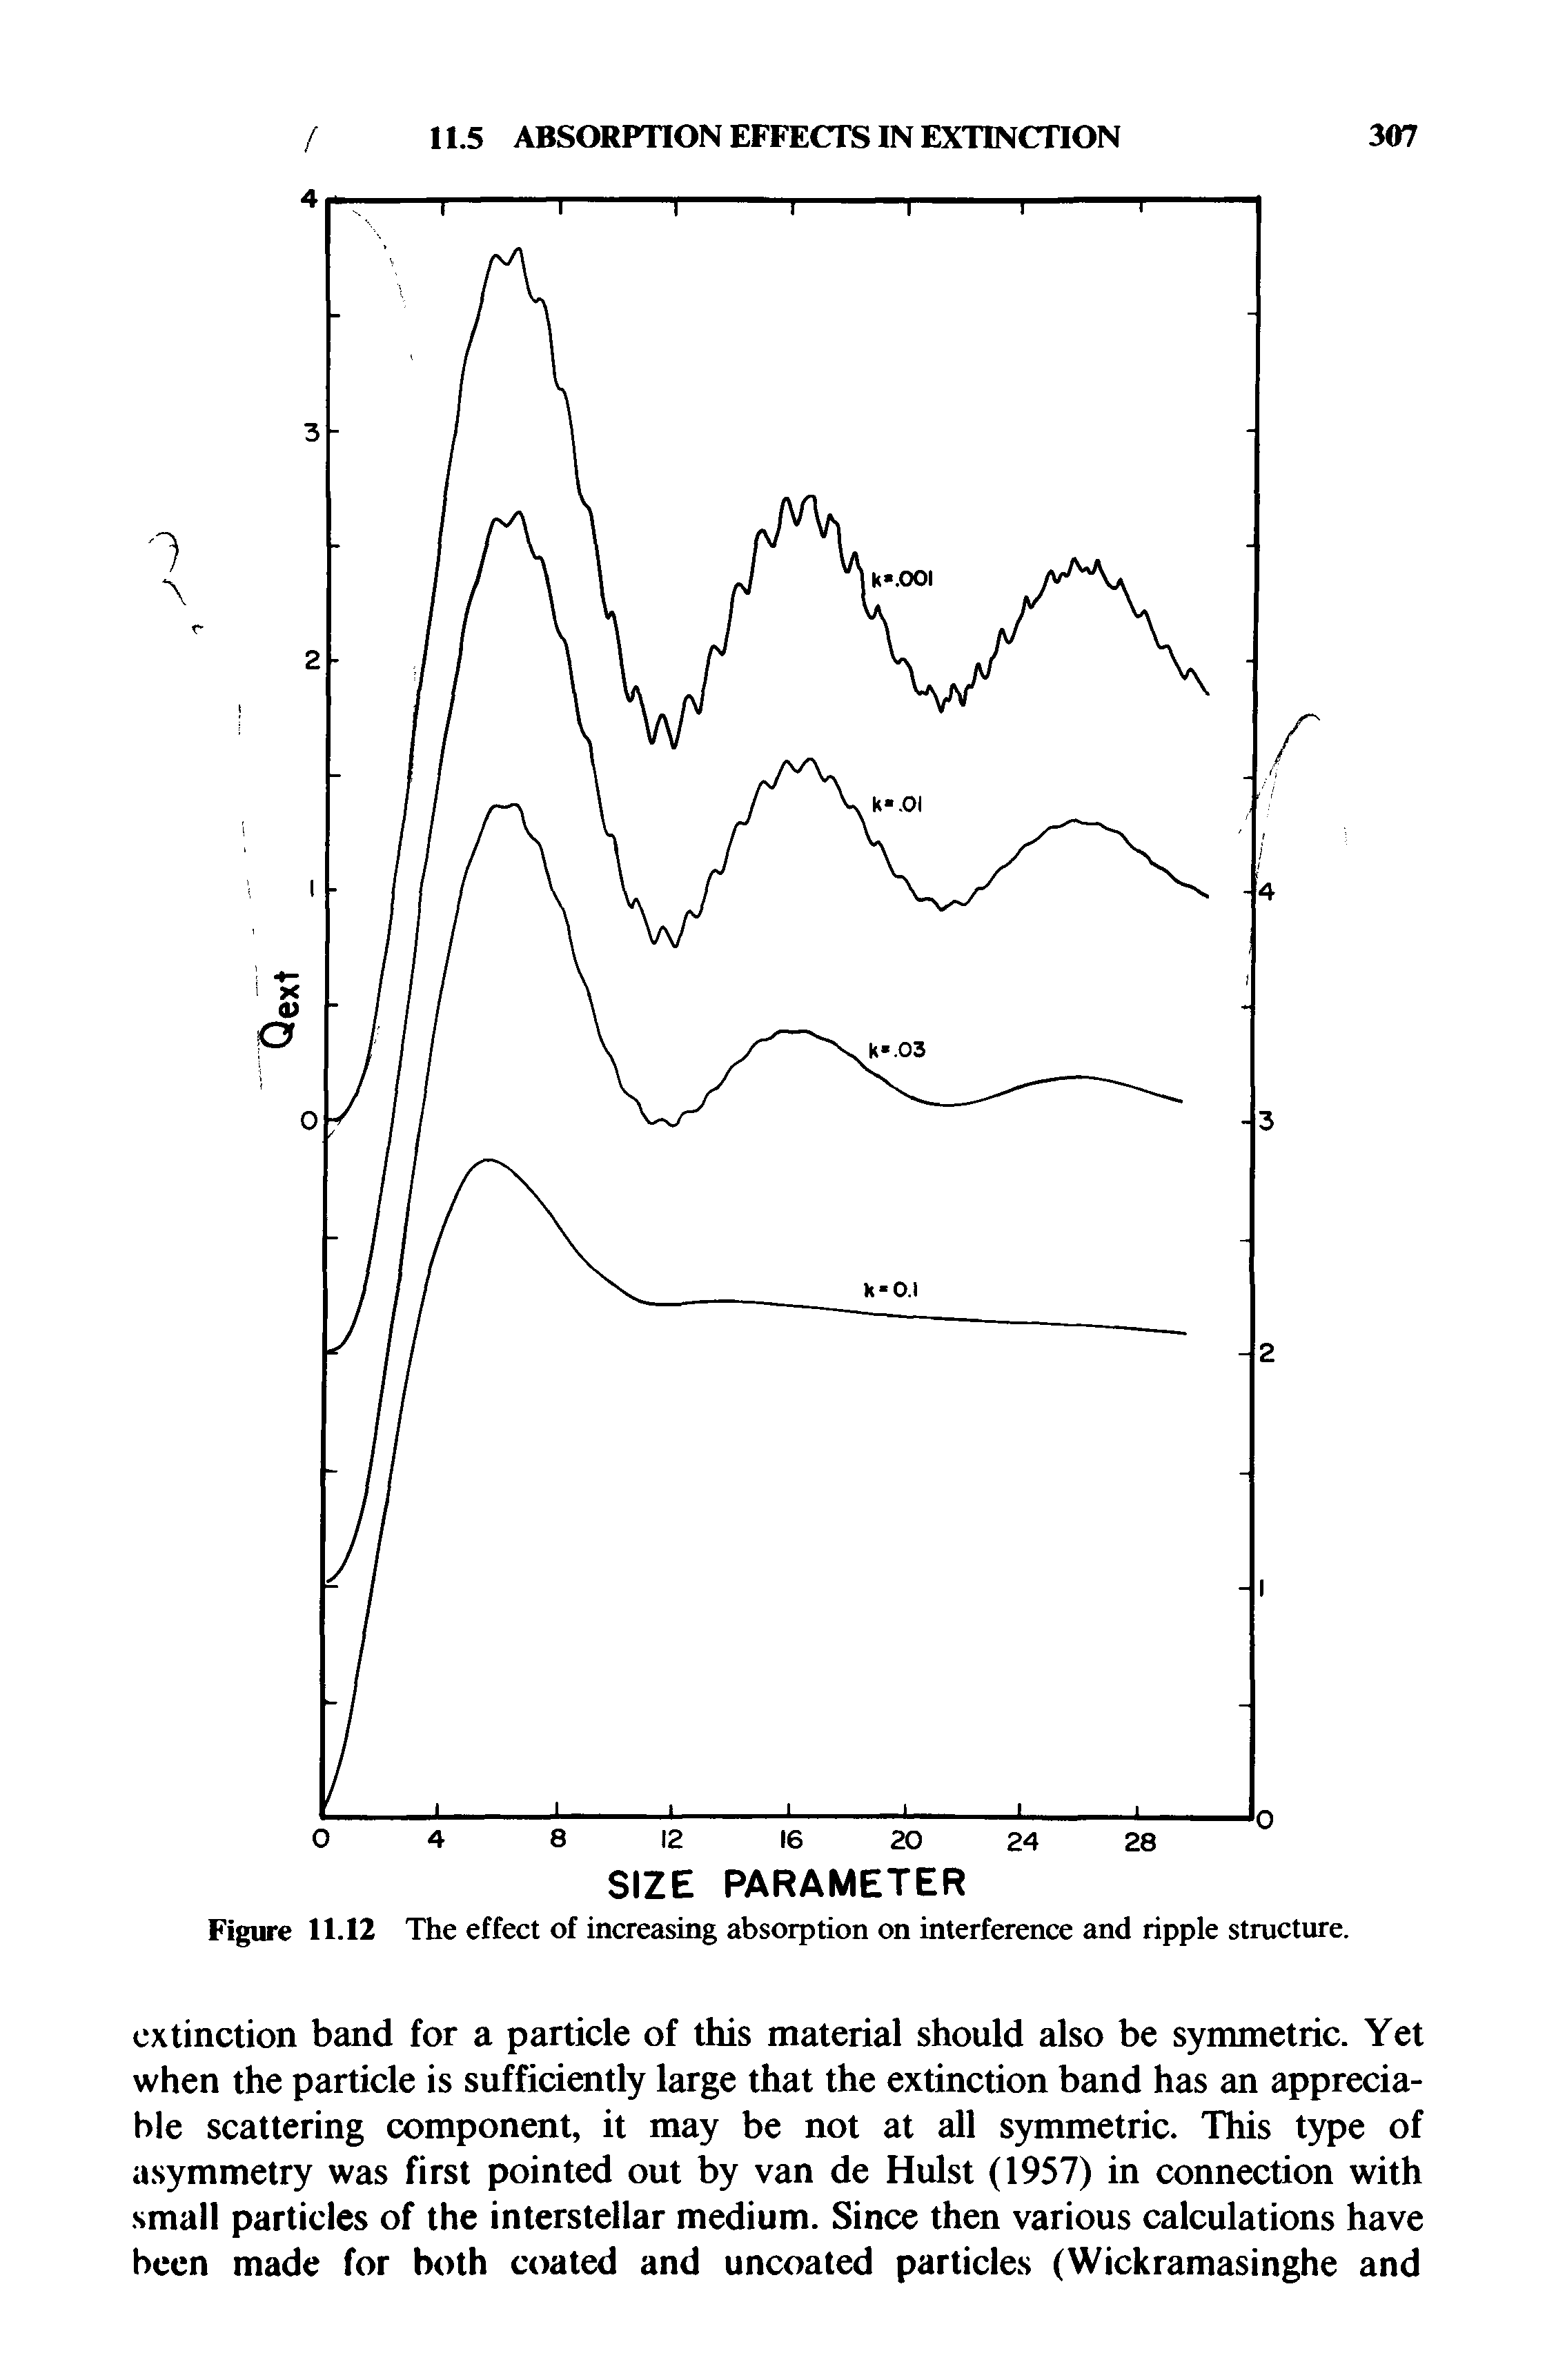 Figure 11.12 The effect of increasing absorption on interference and ripple structure.